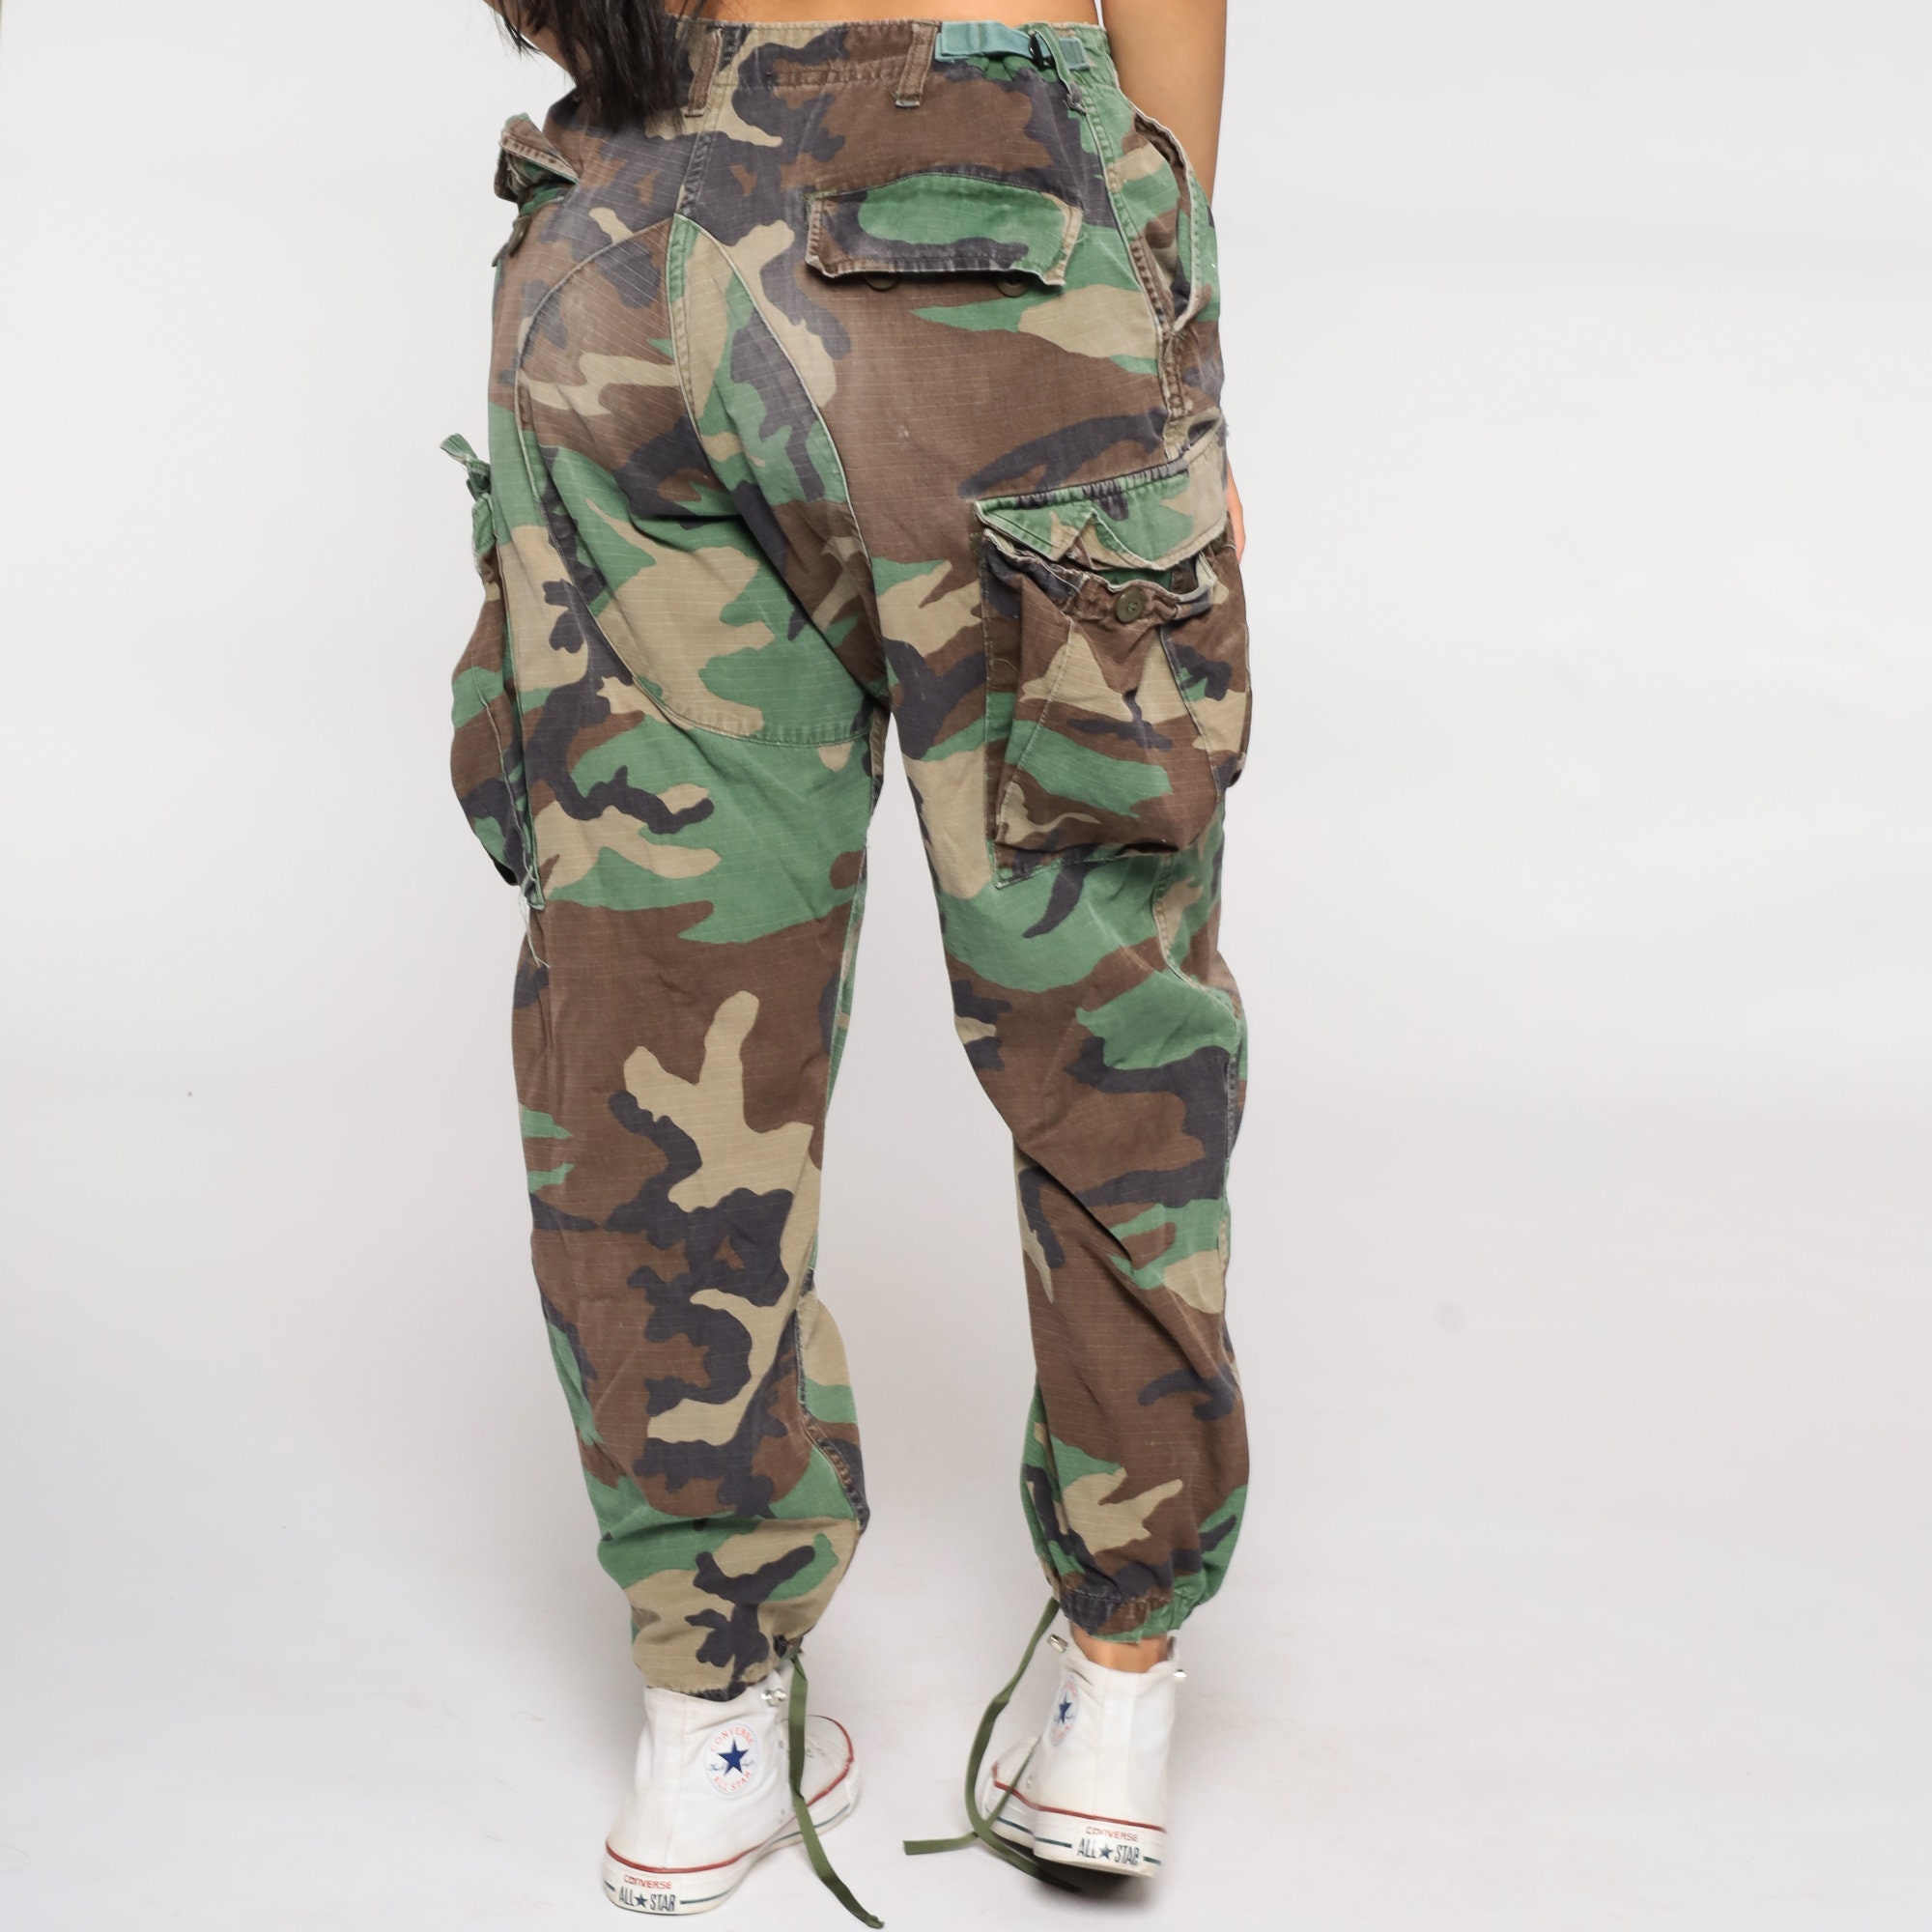 Camo Army Pants CARGO Pants 80s Military Combat Olive Green Camouflage ...